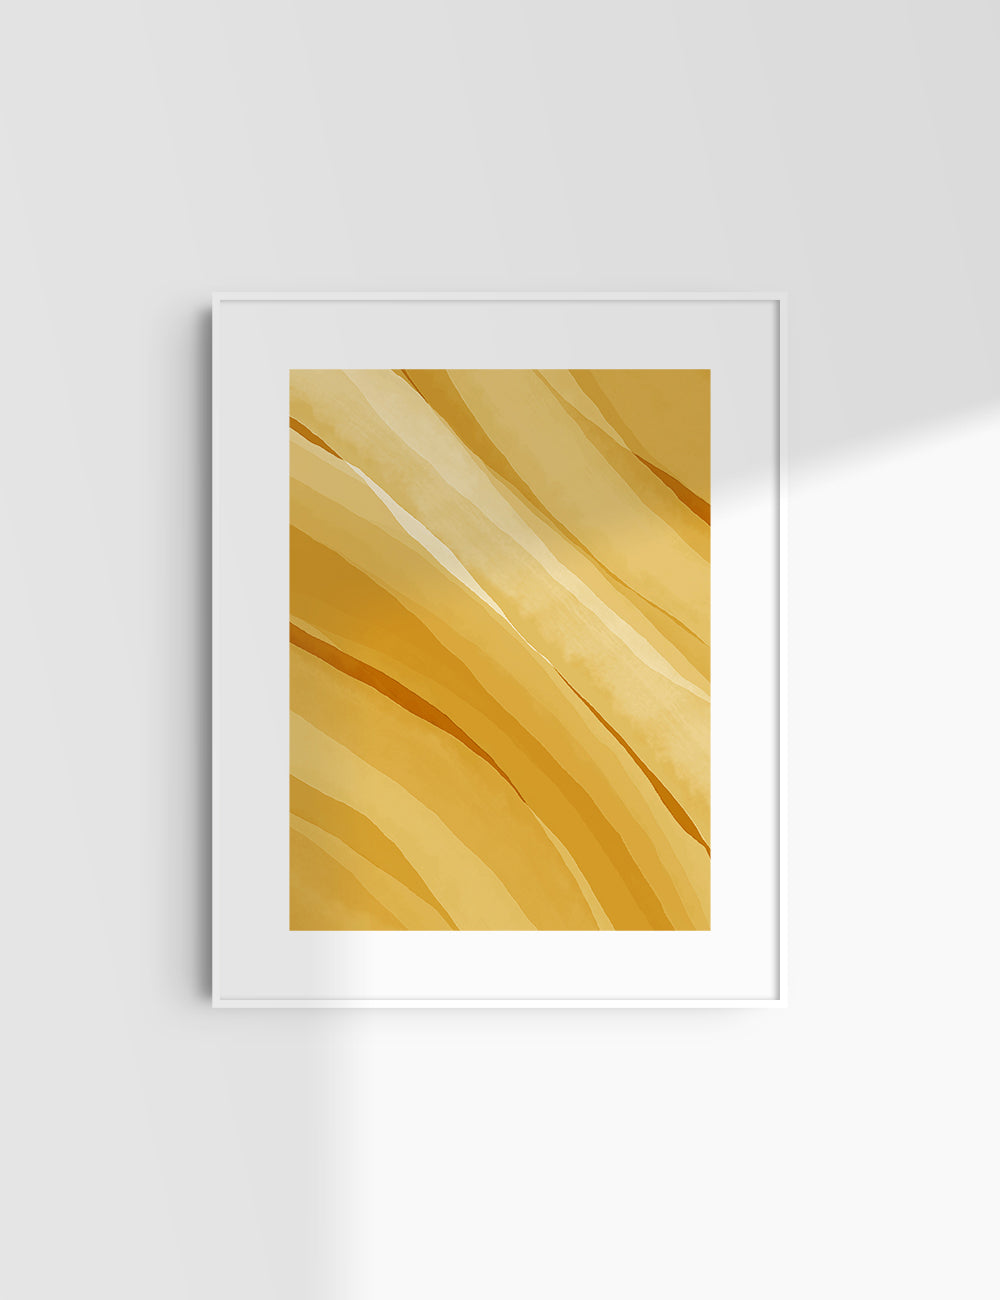 YELLOW GOLD WATERCOLOR ABSTRACT. Aesthetic. Minimalist. Abstract Watercolor Painting. Printable Wall Art. - PAPER MOON Art & Design